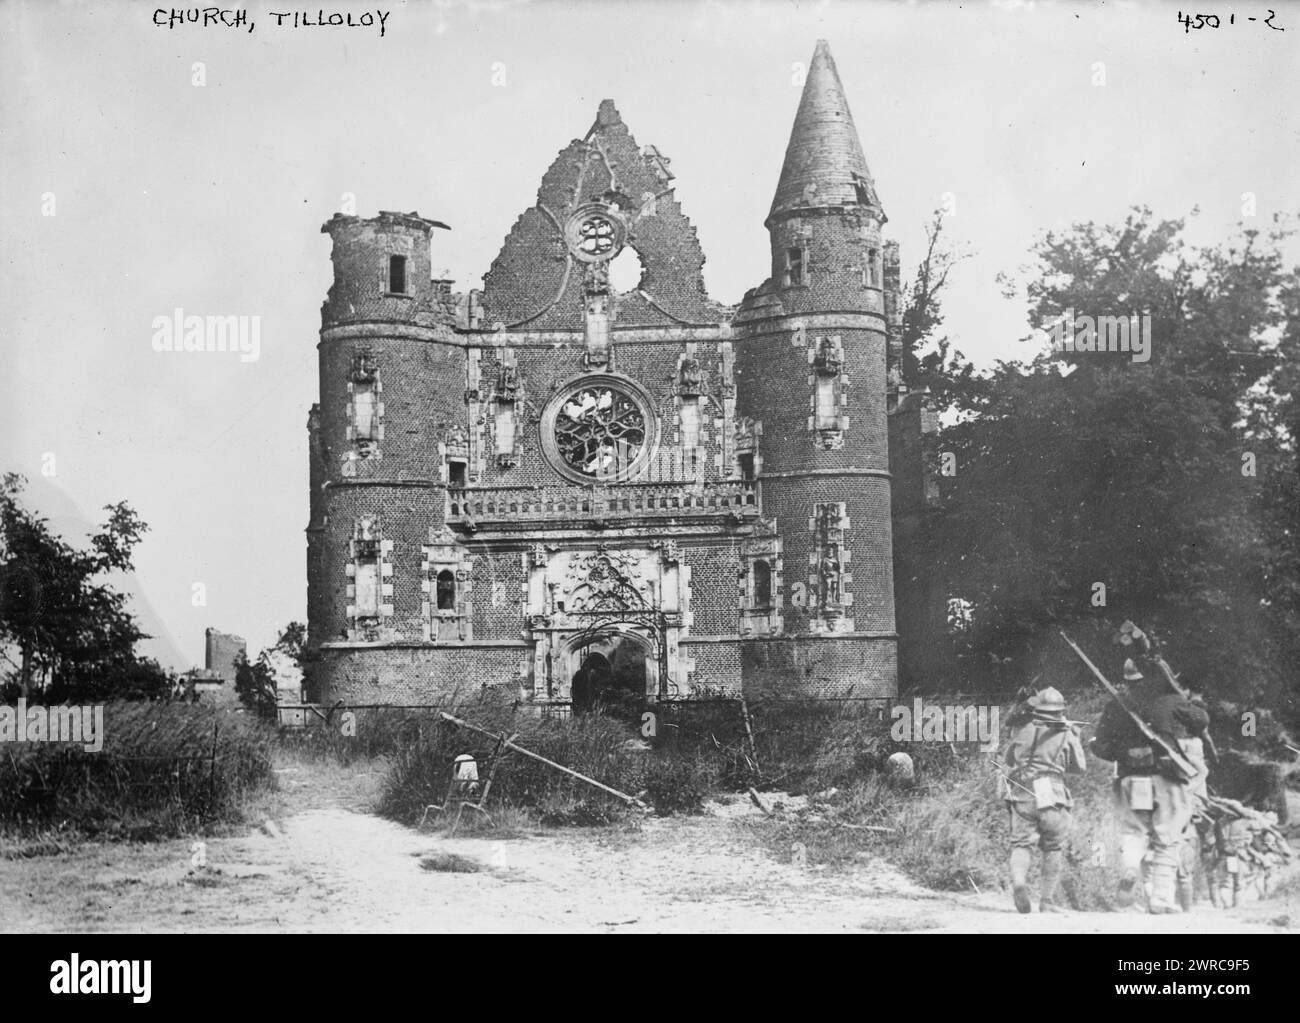 Church, Tilloloy, Photograph shows L'église Notre-Dame-de-Lorette de Tilloloy which was damaged during the early days of World War I., between ca. 1915 and 1917, World War, 1914-1918, Glass negatives, 1 negative: glass Stock Photo